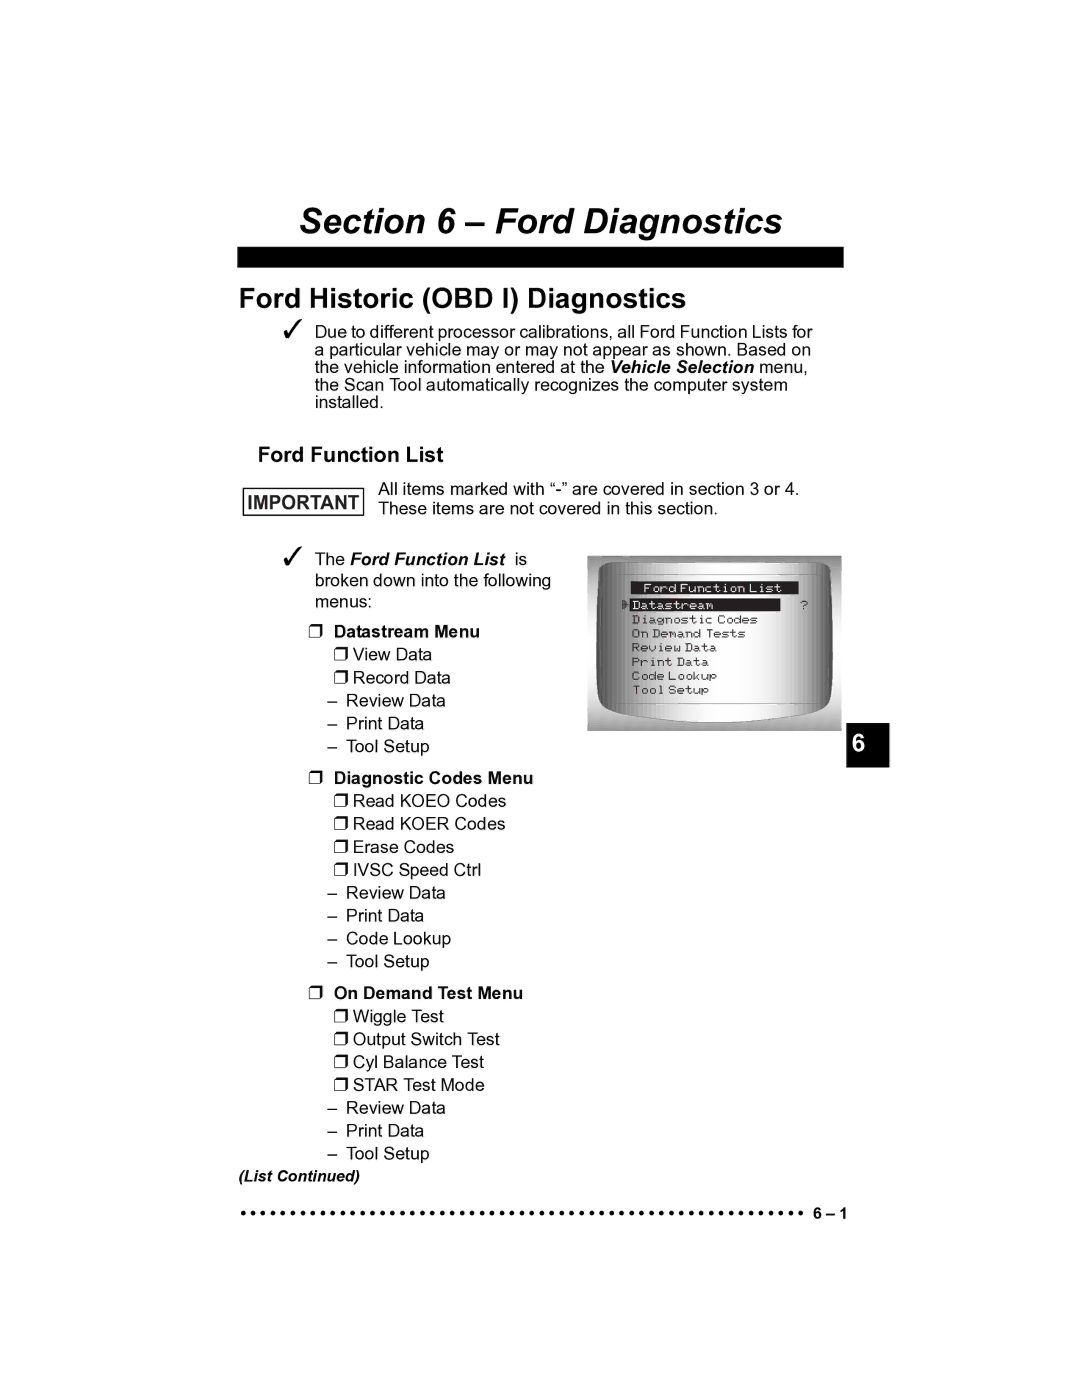 Actron CP9185 manual Ford Function List is, On Demand Test Menu 